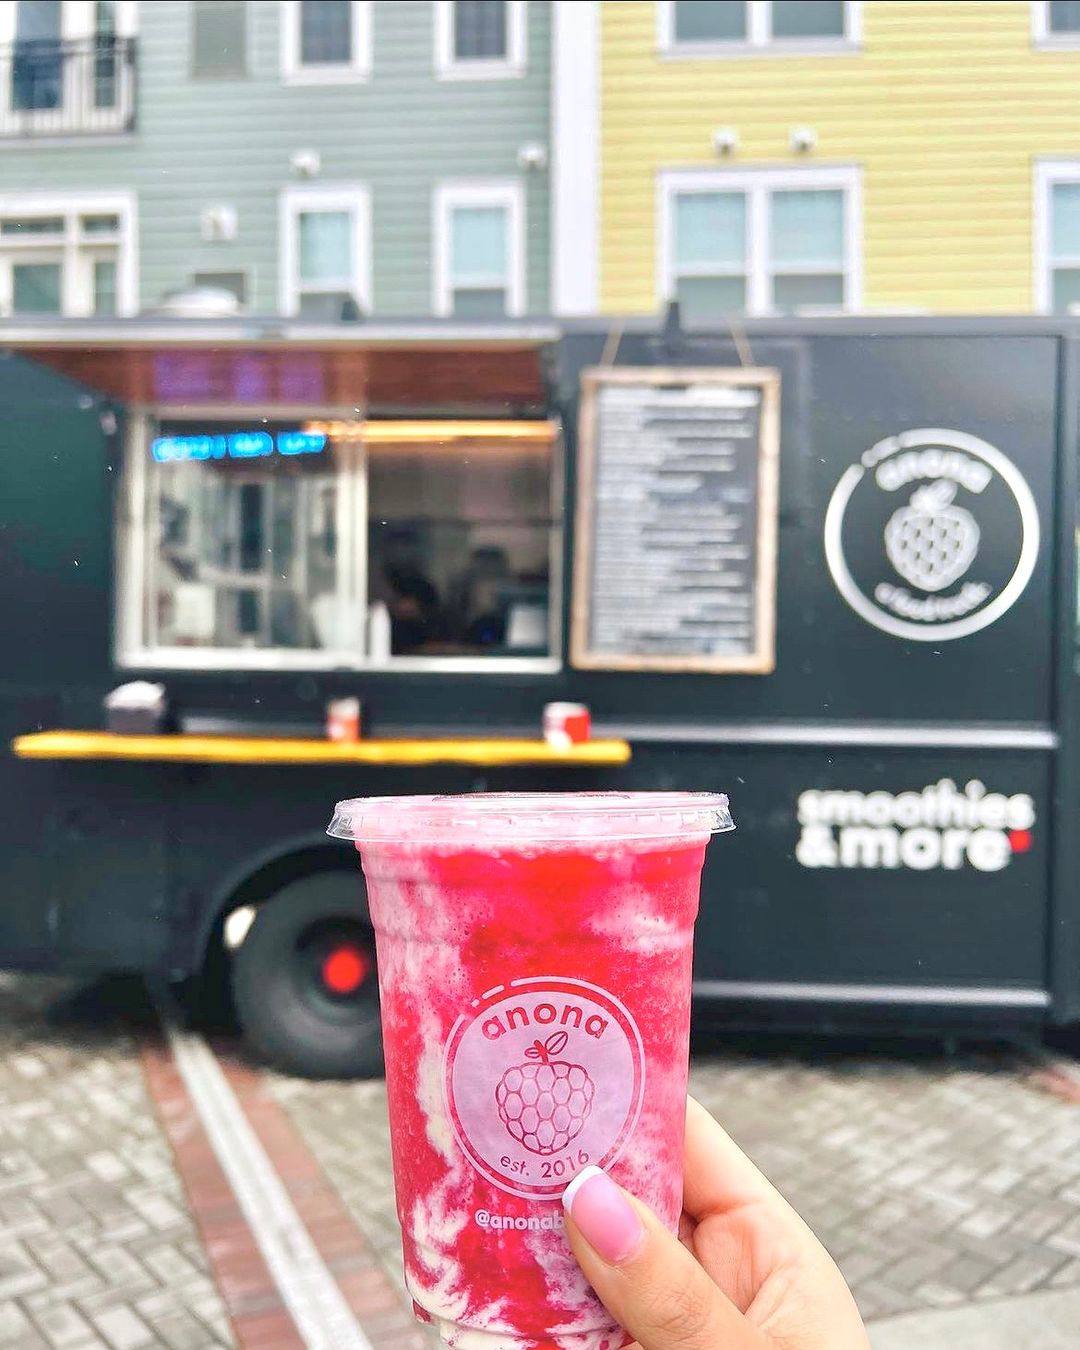 Smoothie from Anona Blends food truck